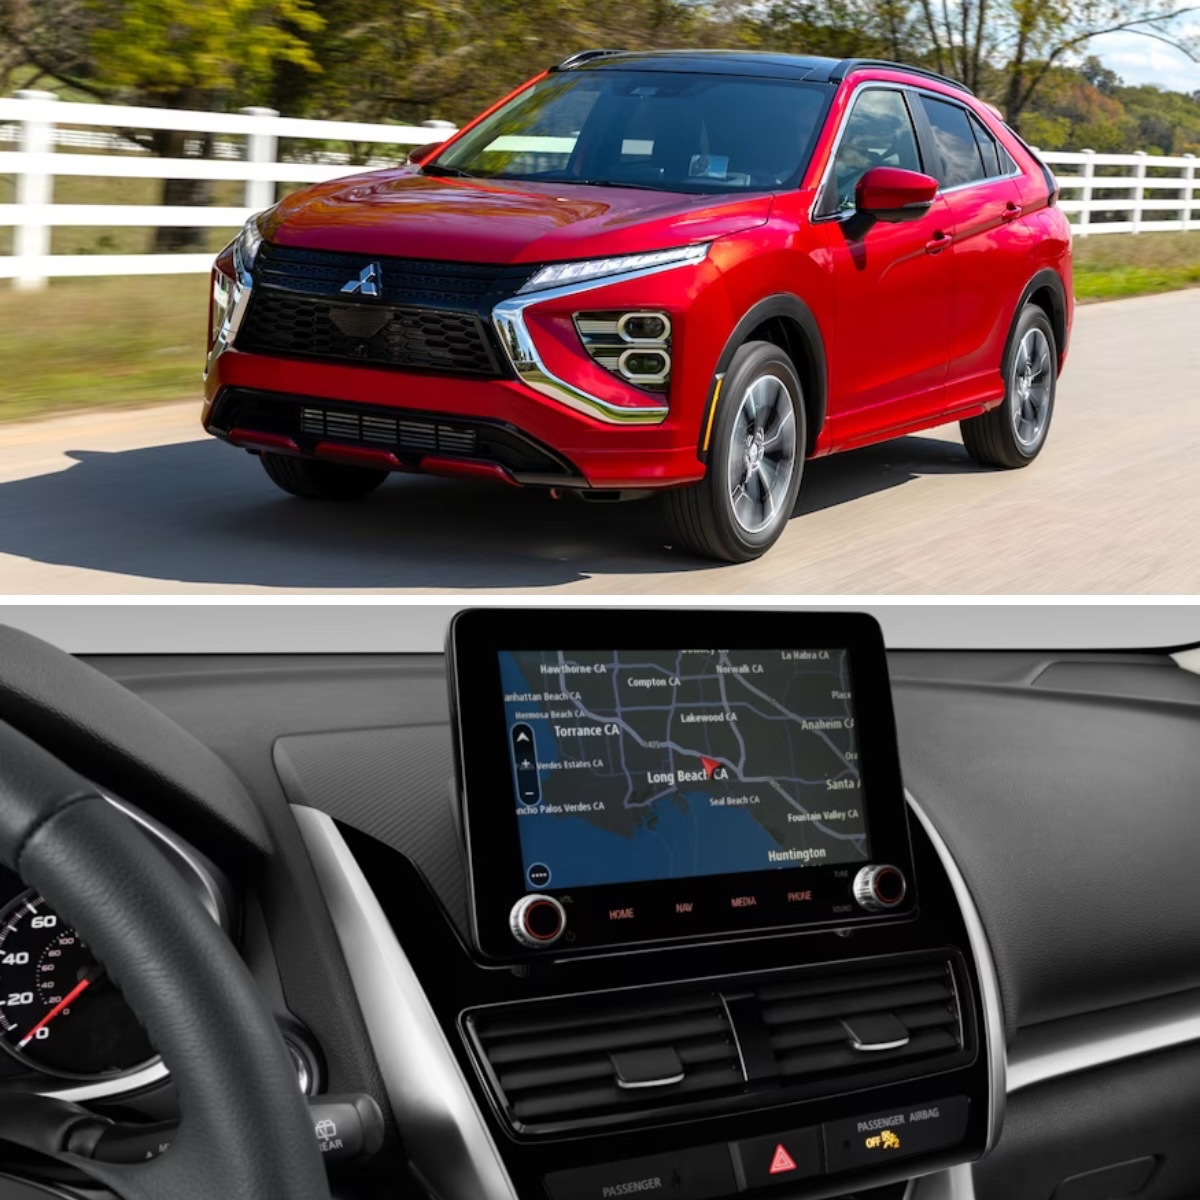 Life is a journey, so why don't you savor each ride behind the wheel of a 2024 #Mitsubishi #EclipseCross? 🚗✨ Come visit us this weekend to discover a new level of driving pleasure. 😌 #TGIF